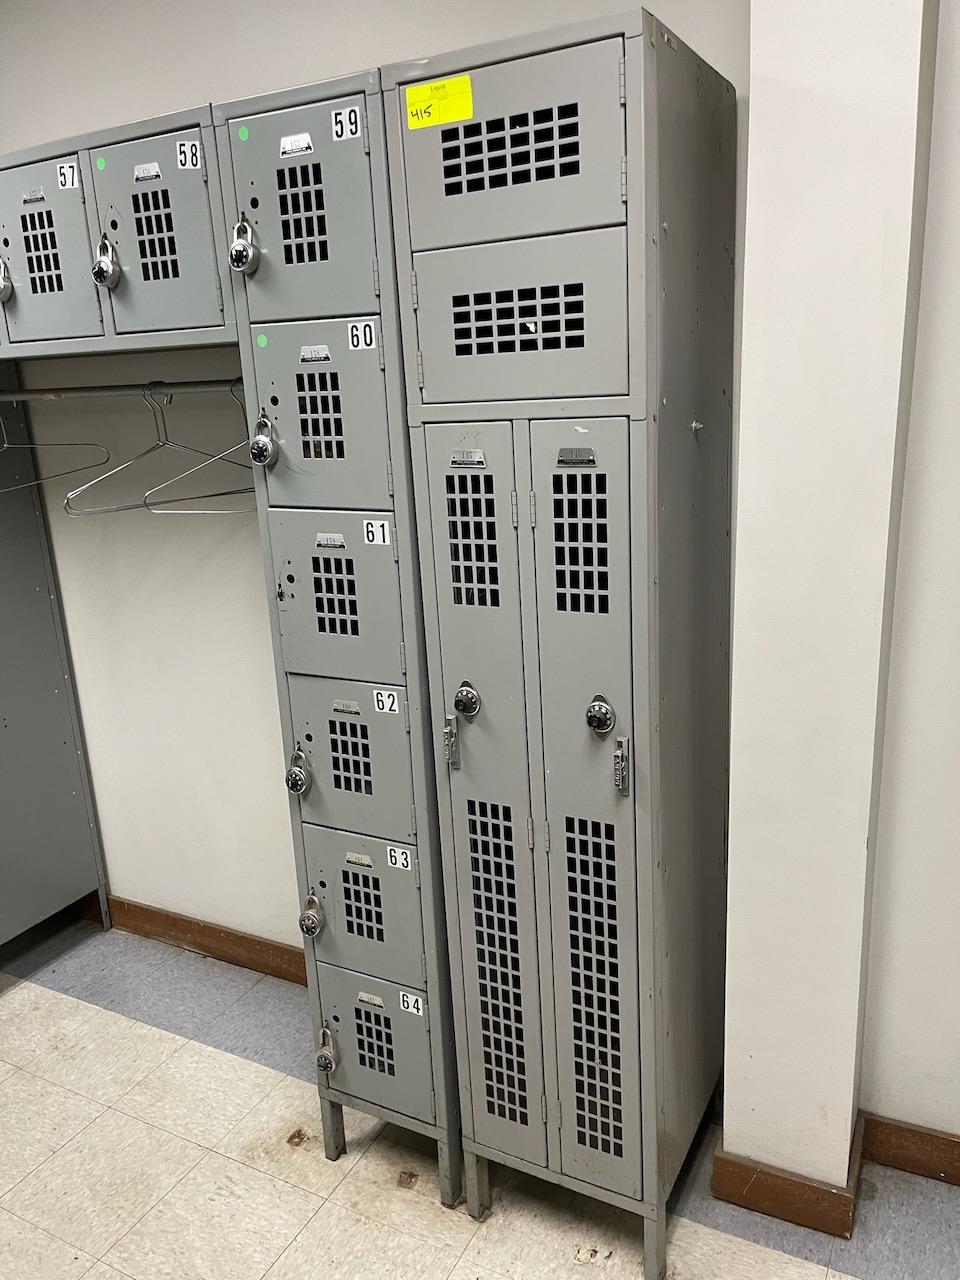 Lockers (36)  - 12"x12"x18" Holes - Gray Plus vertical section